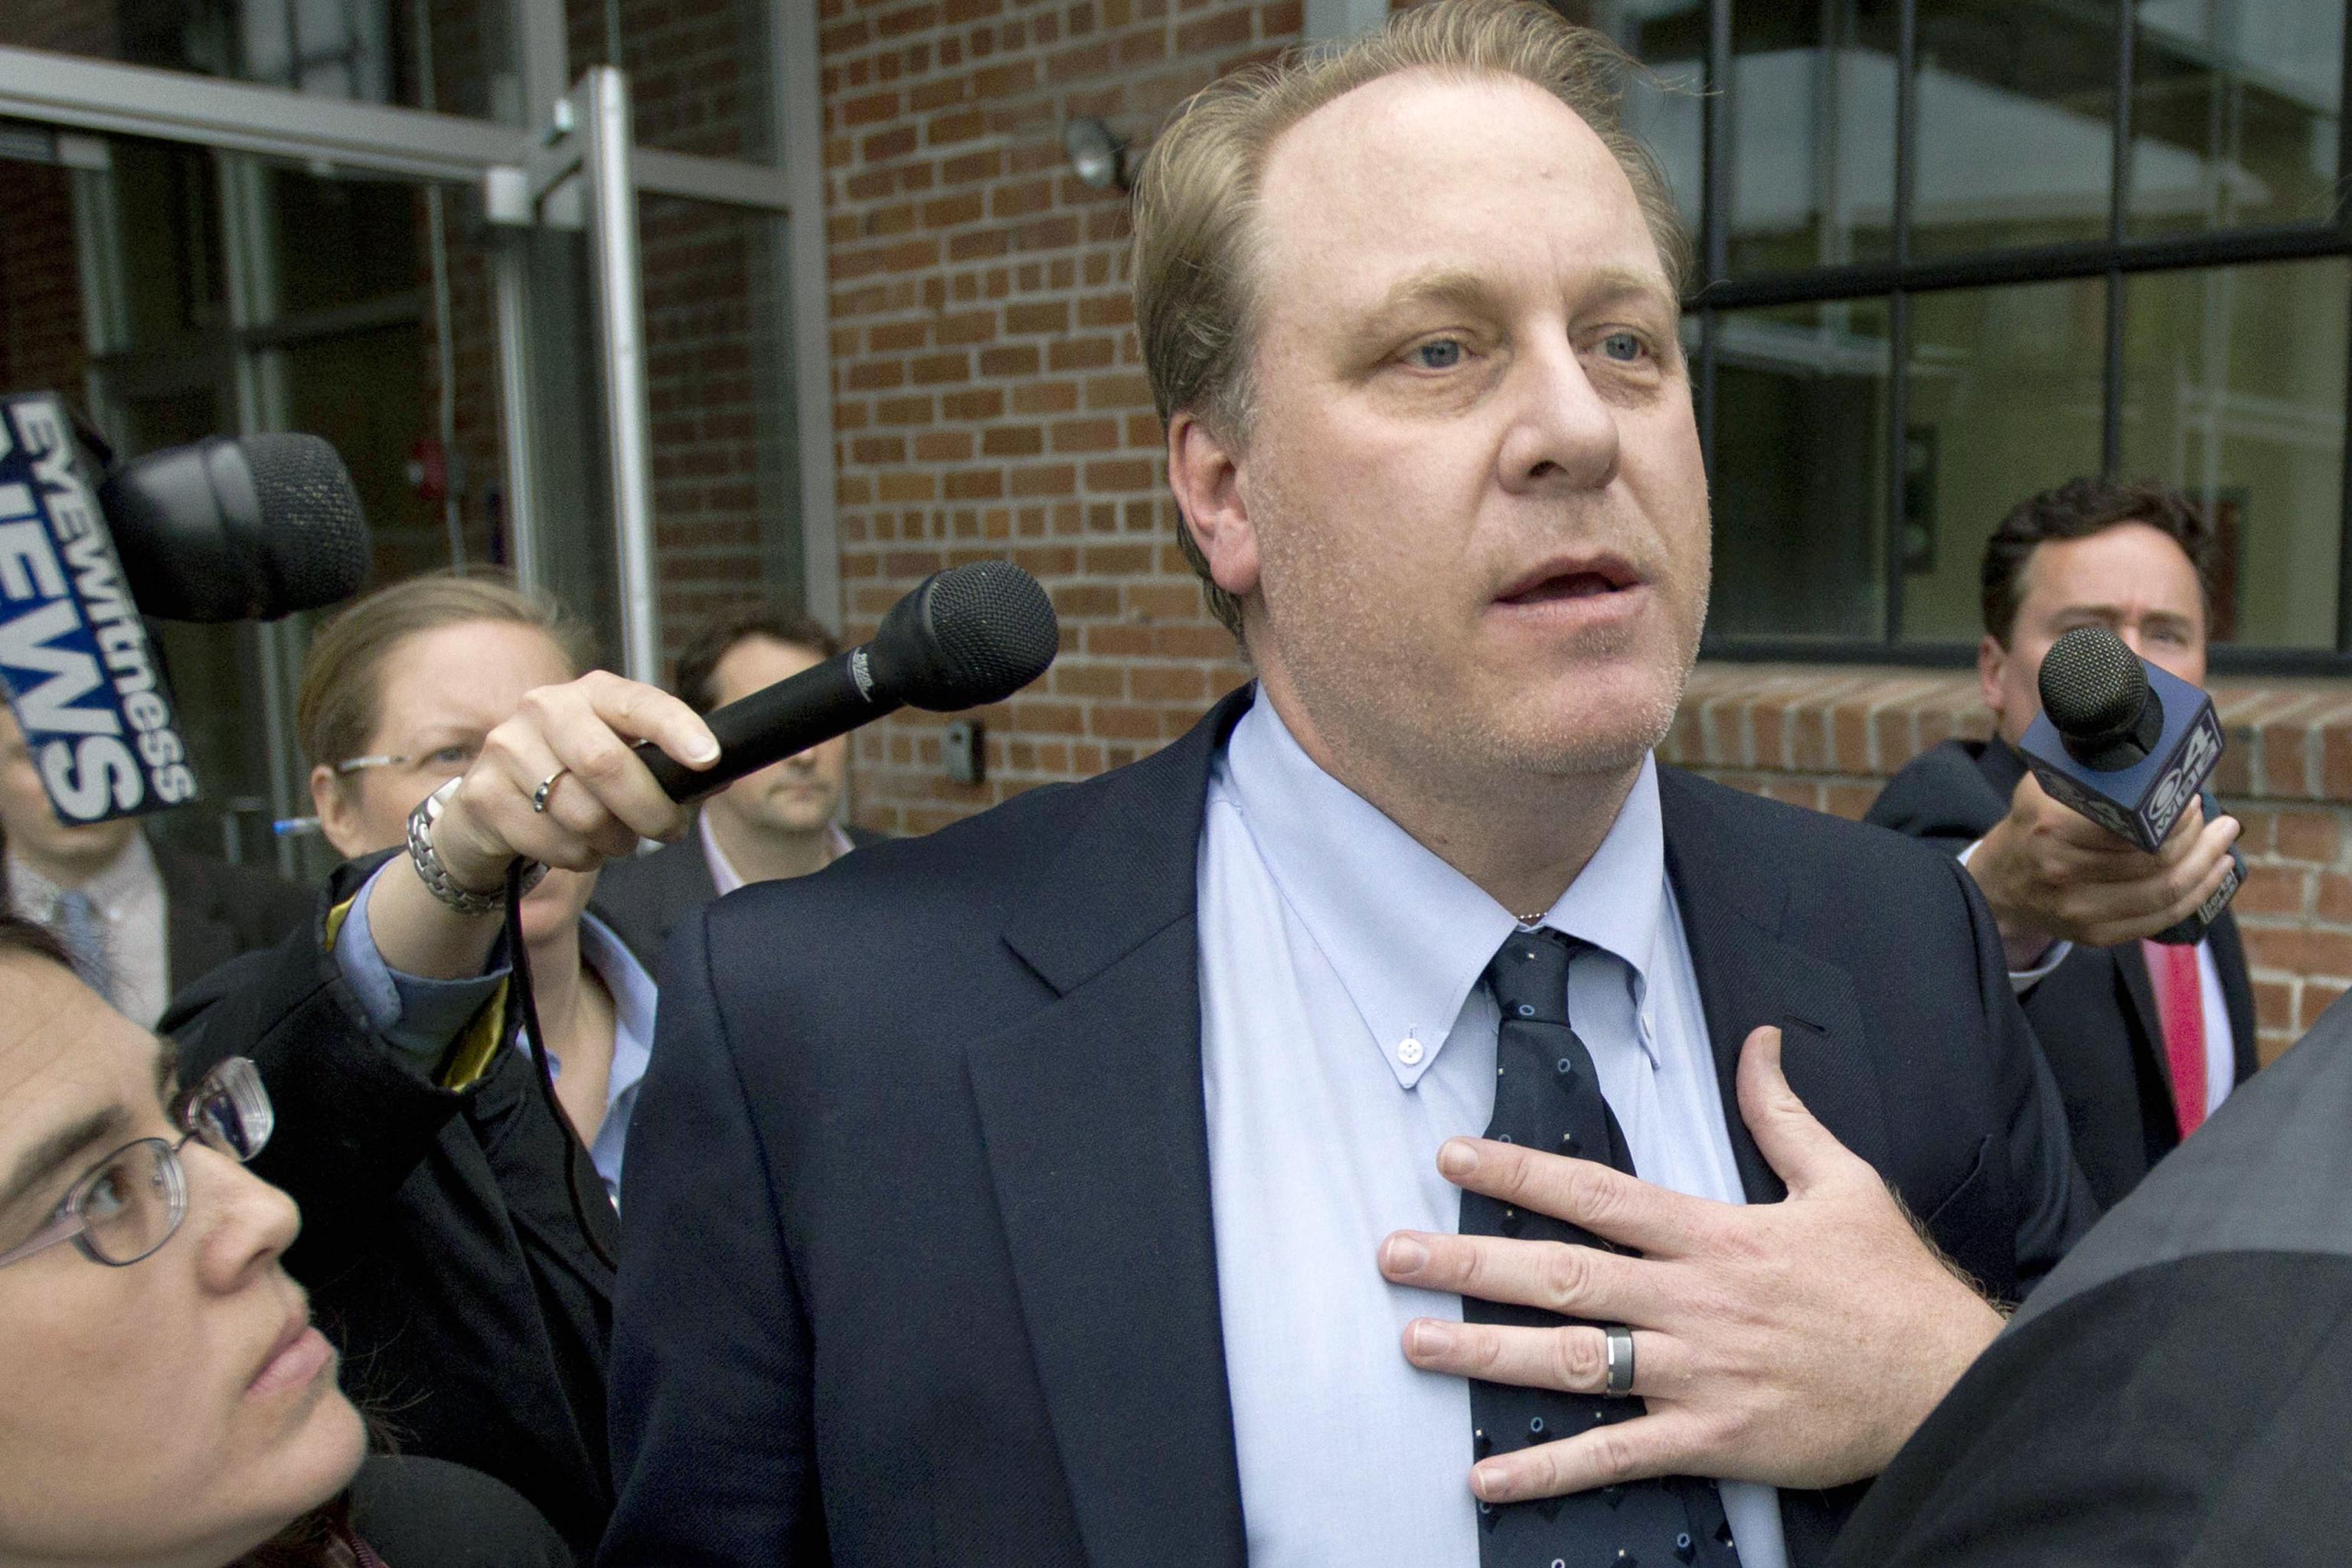 Curt Schilling, ESPN Analyst, Is Fired Over Offensive Social Media Post